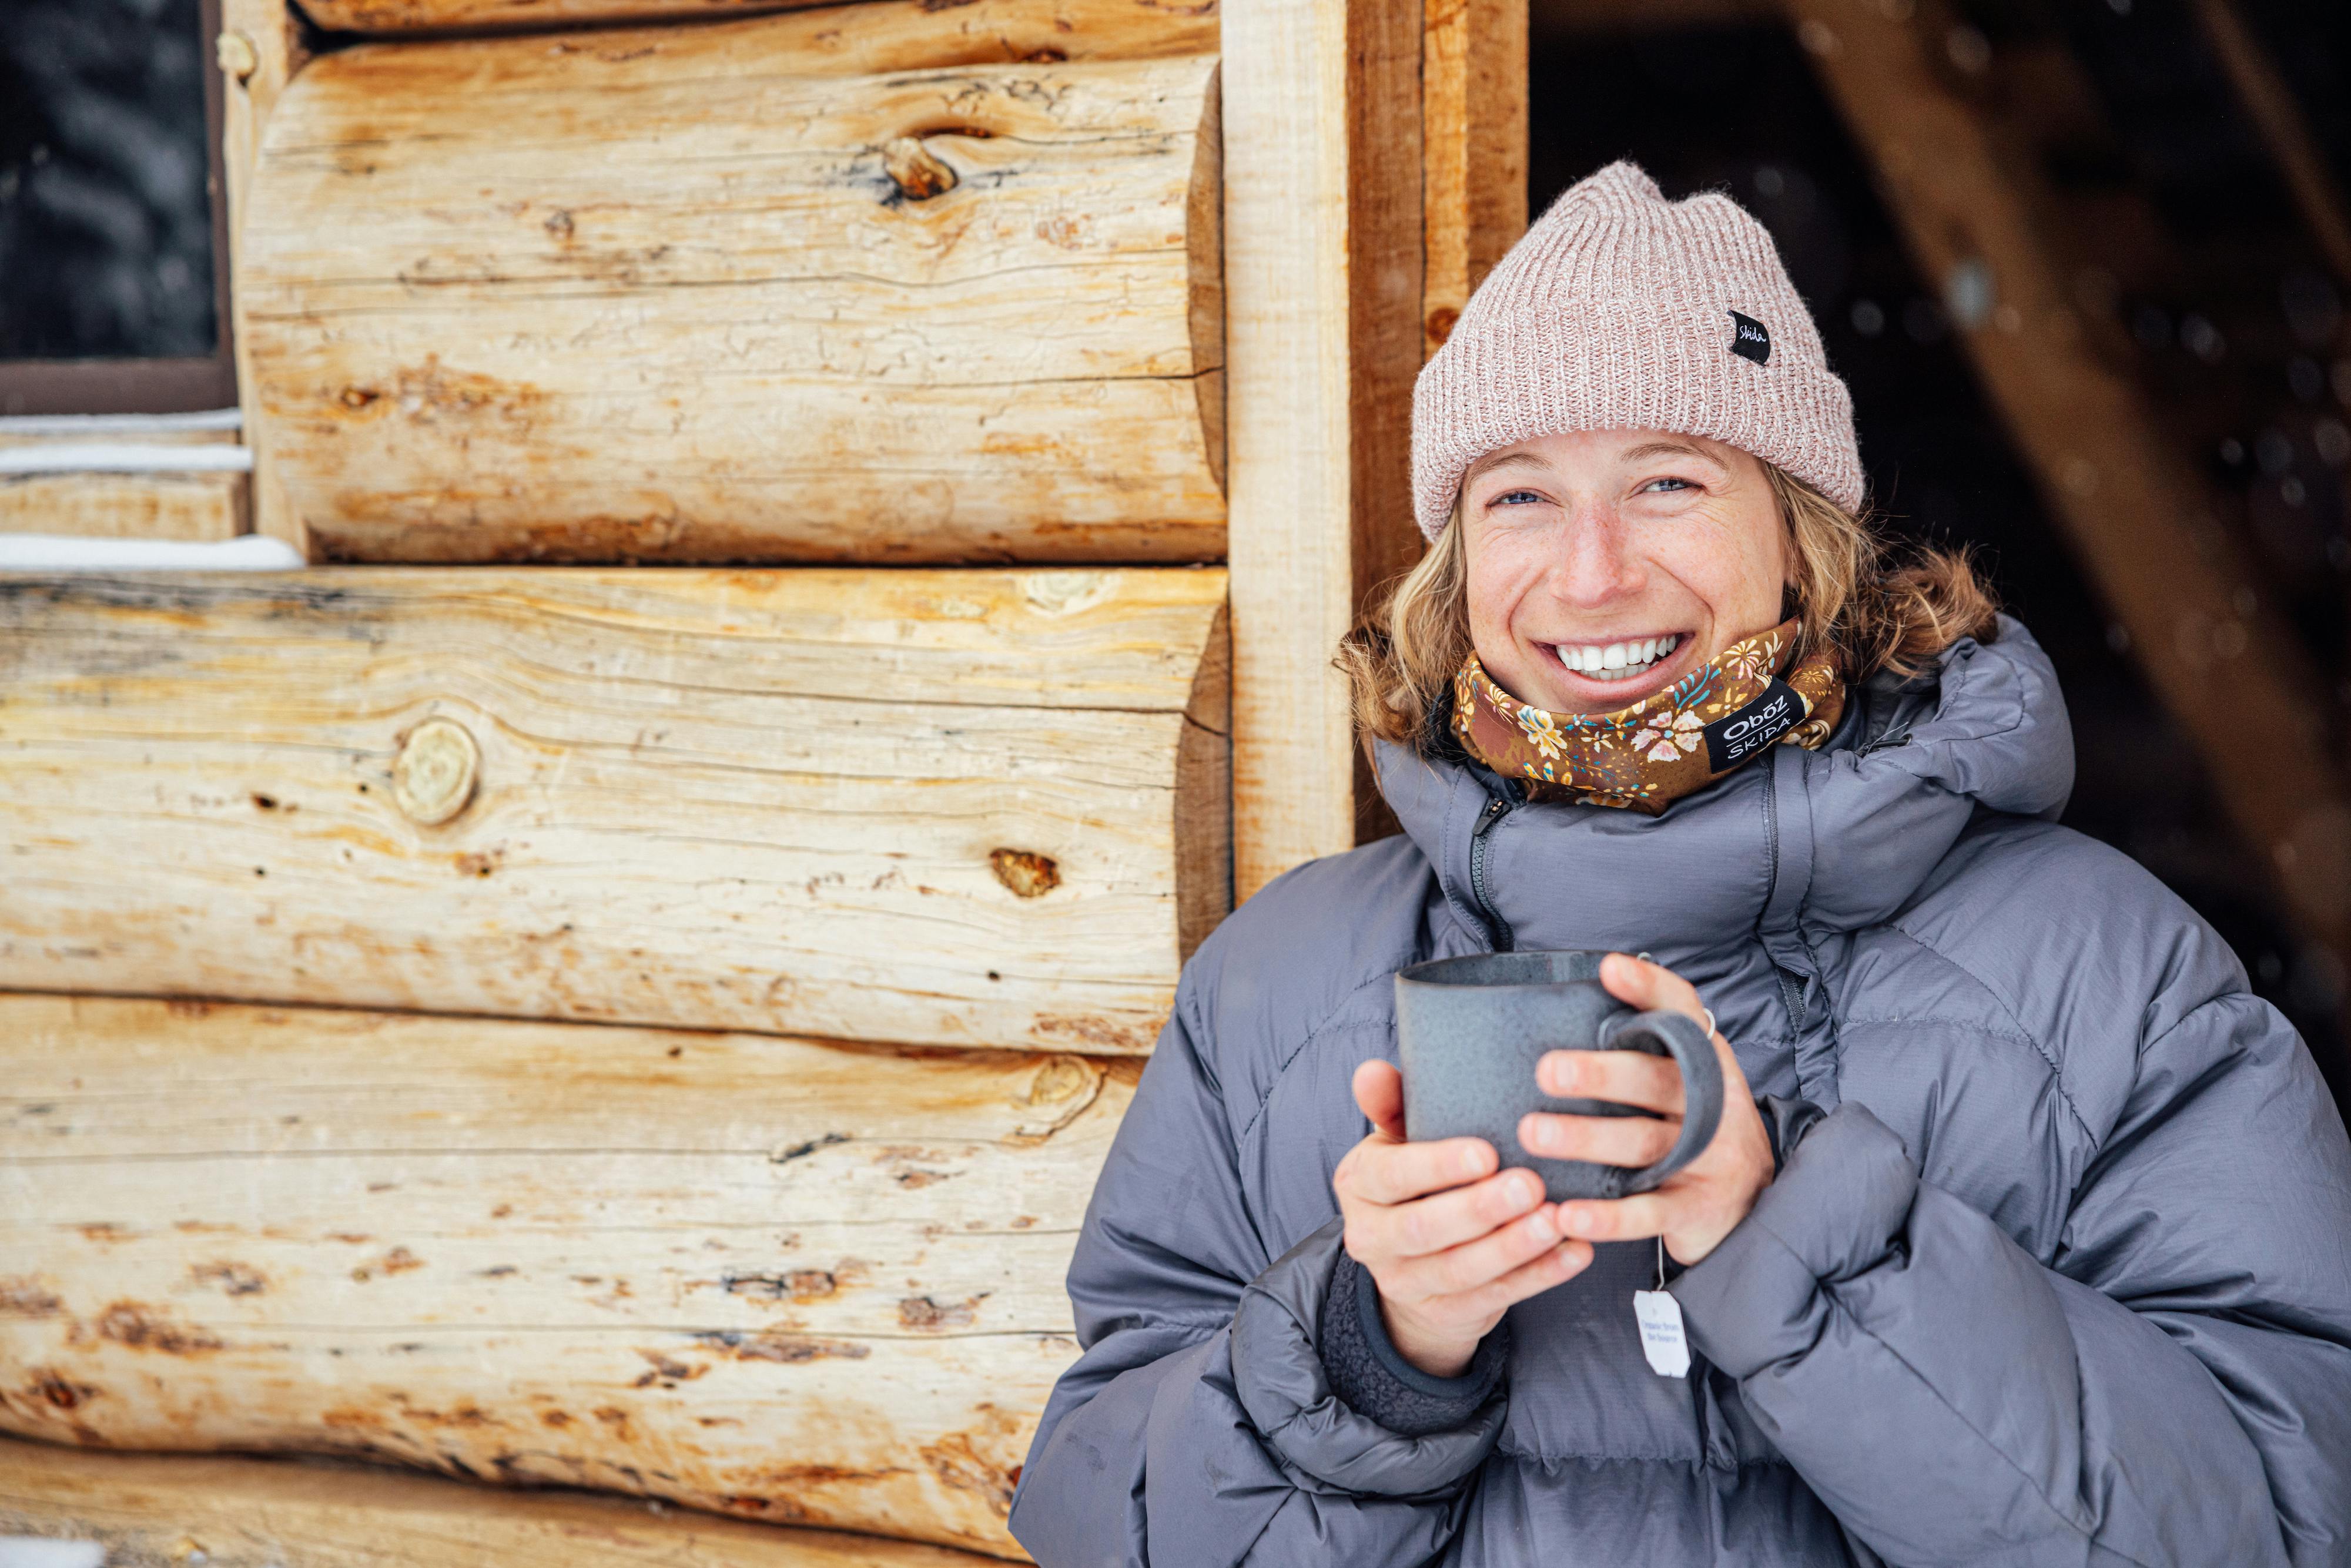 Corinne Prevot, founder of Skida enjoying a tea at a cabin in Cooke City.